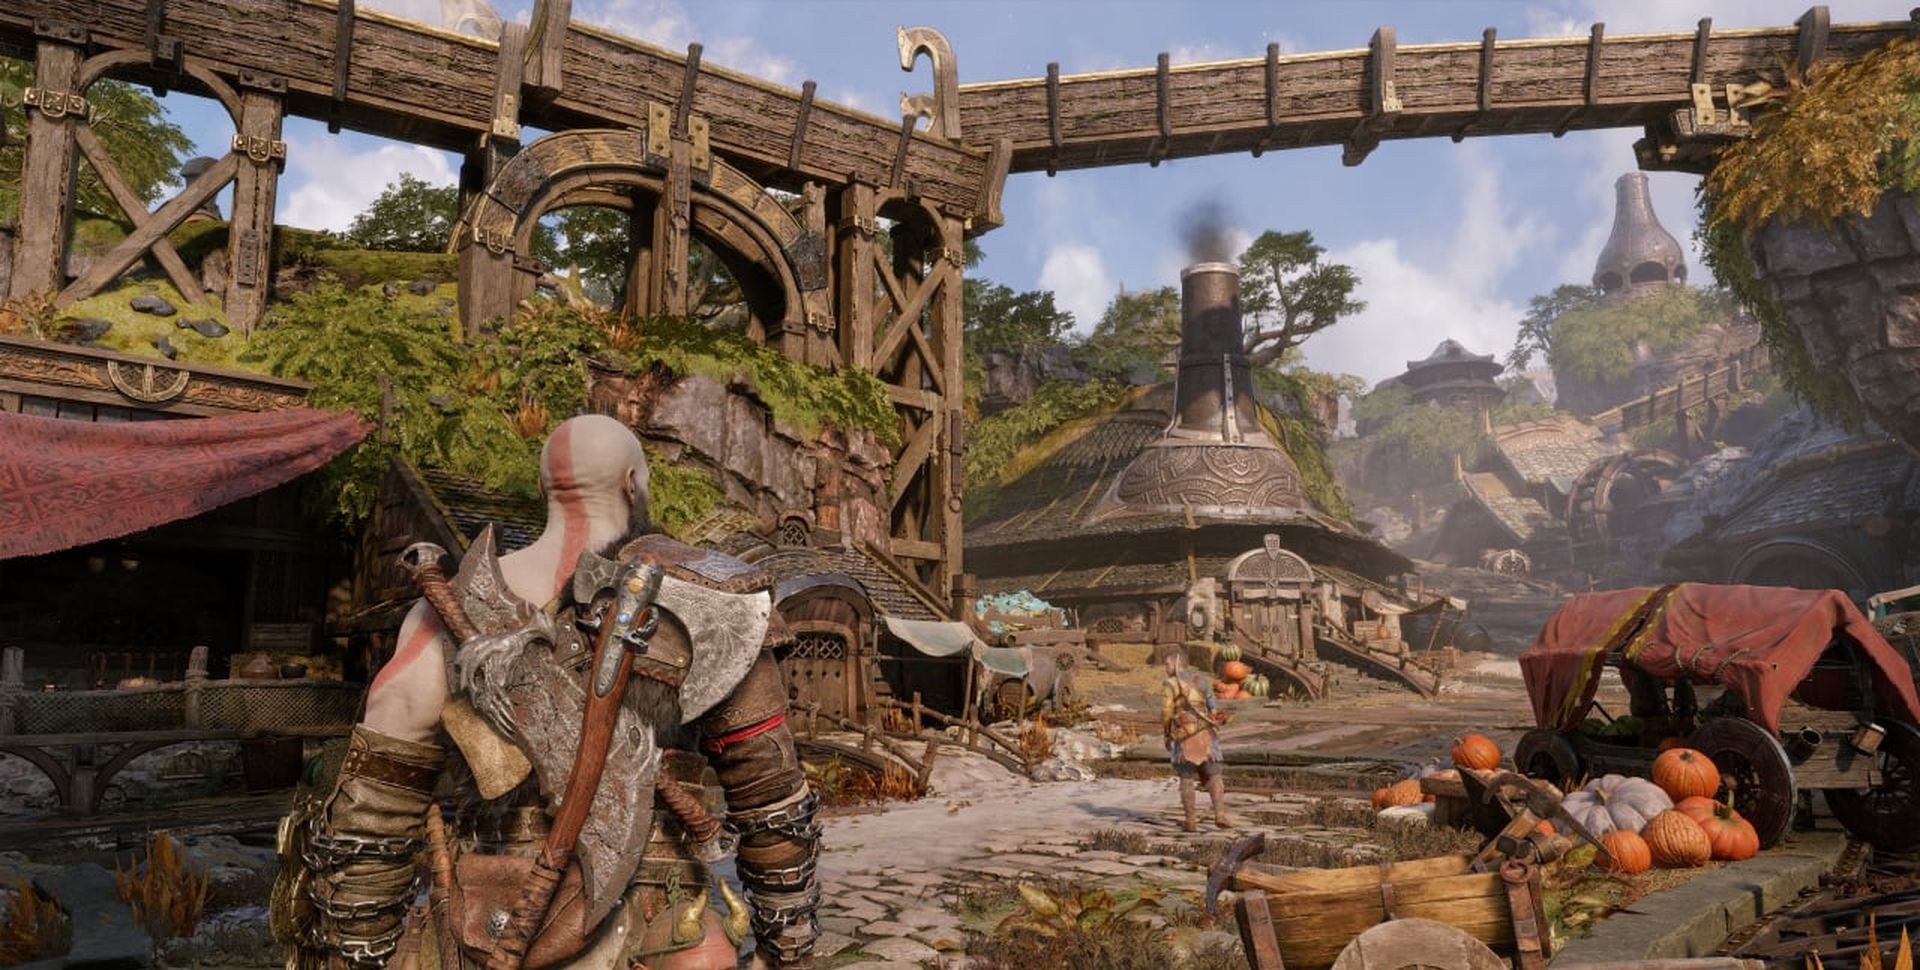 There are 5 collectible spots in God of War Althoff Rig. This walkthrough will take you chronologically through all of the collectibles in Althjof's Rig...